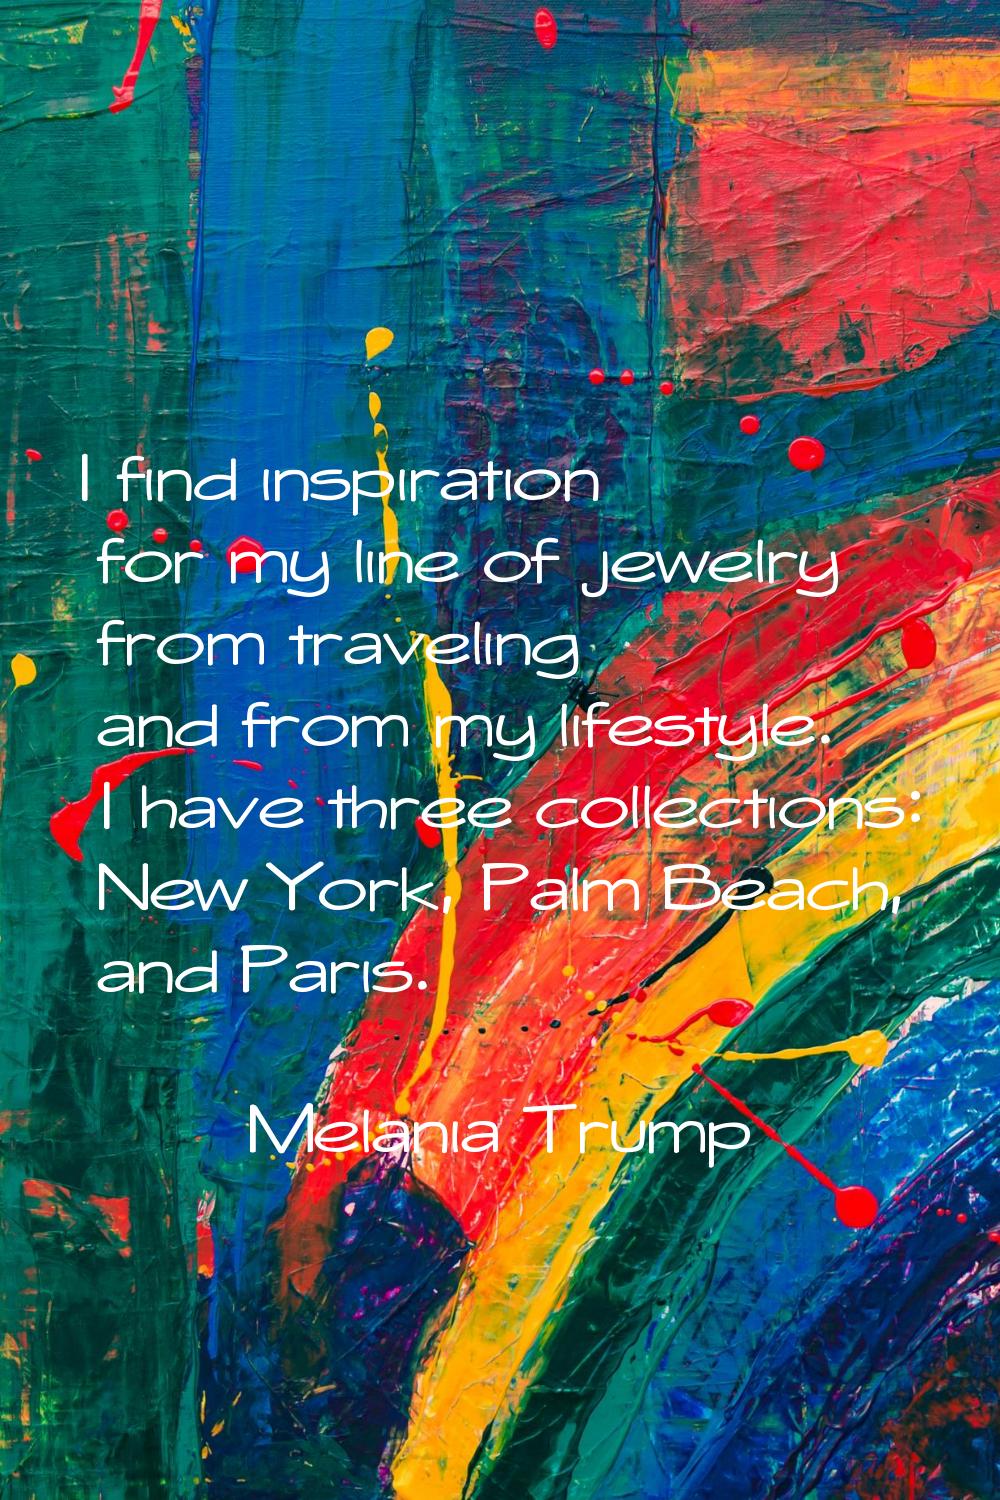 I find inspiration for my line of jewelry from traveling and from my lifestyle. I have three collec